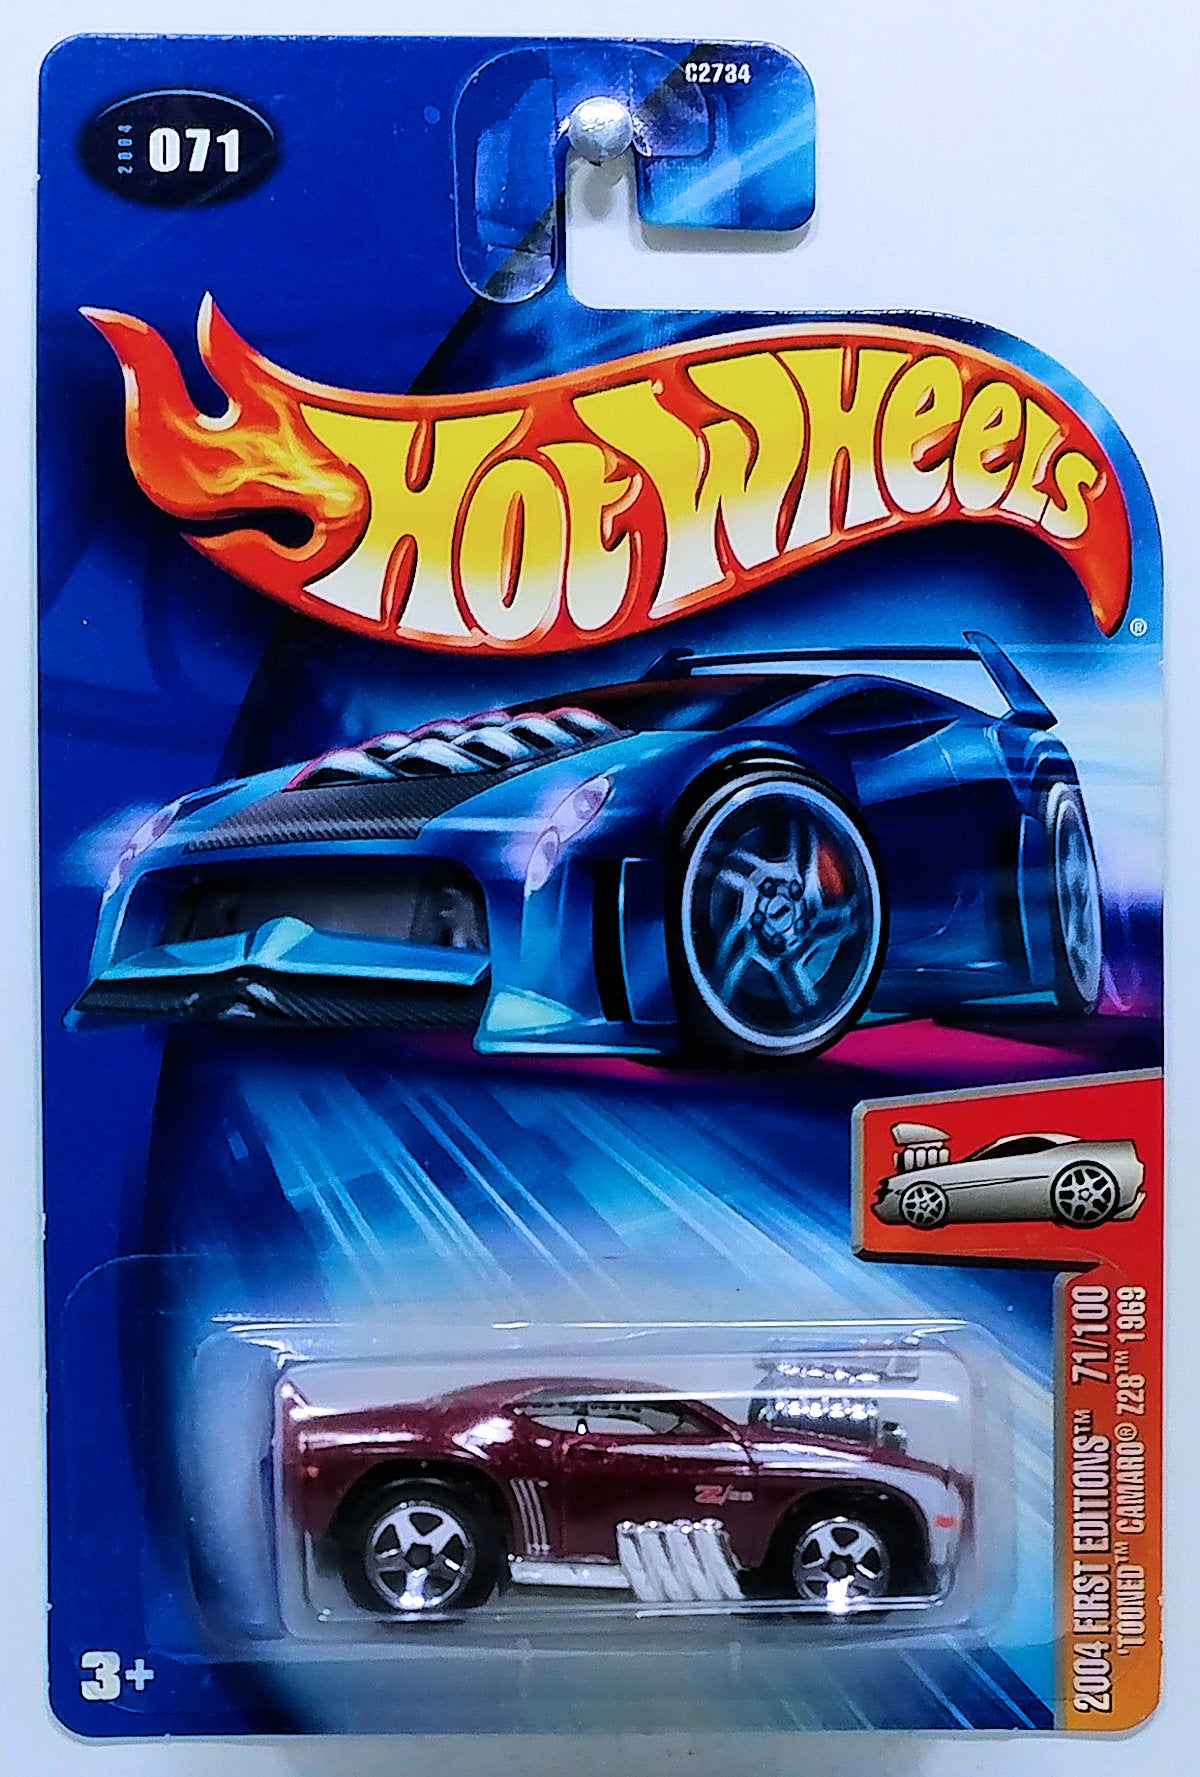 Hot Wheels 2004 - Collector # 071/212 - First Editions 71/100 - 'Tooned Camaro Z28 1969 - Maroon - White Stripes on Sides - NO Hood Stripes